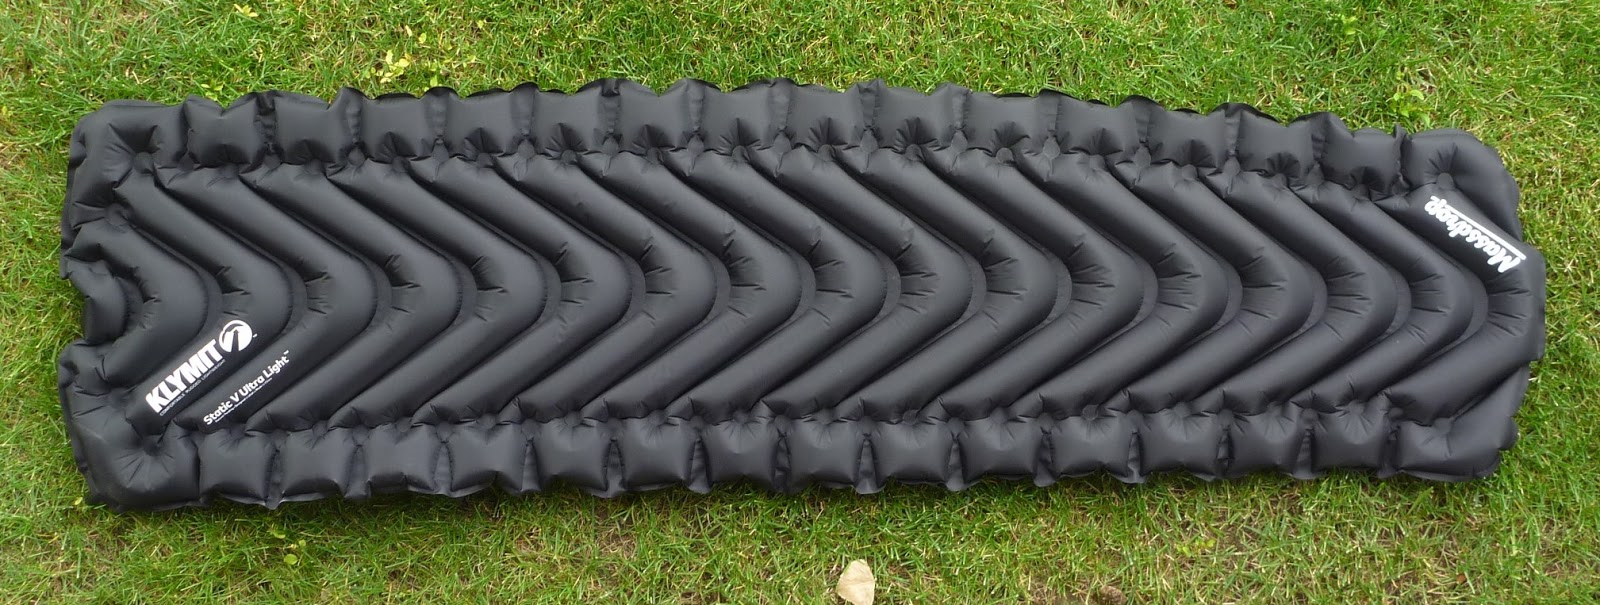 Ultralight Insights What S New And Exciting For Ultralight Backpacking Gear Review Klymit Massdrop Static V Ultra Light Sleeping Pad